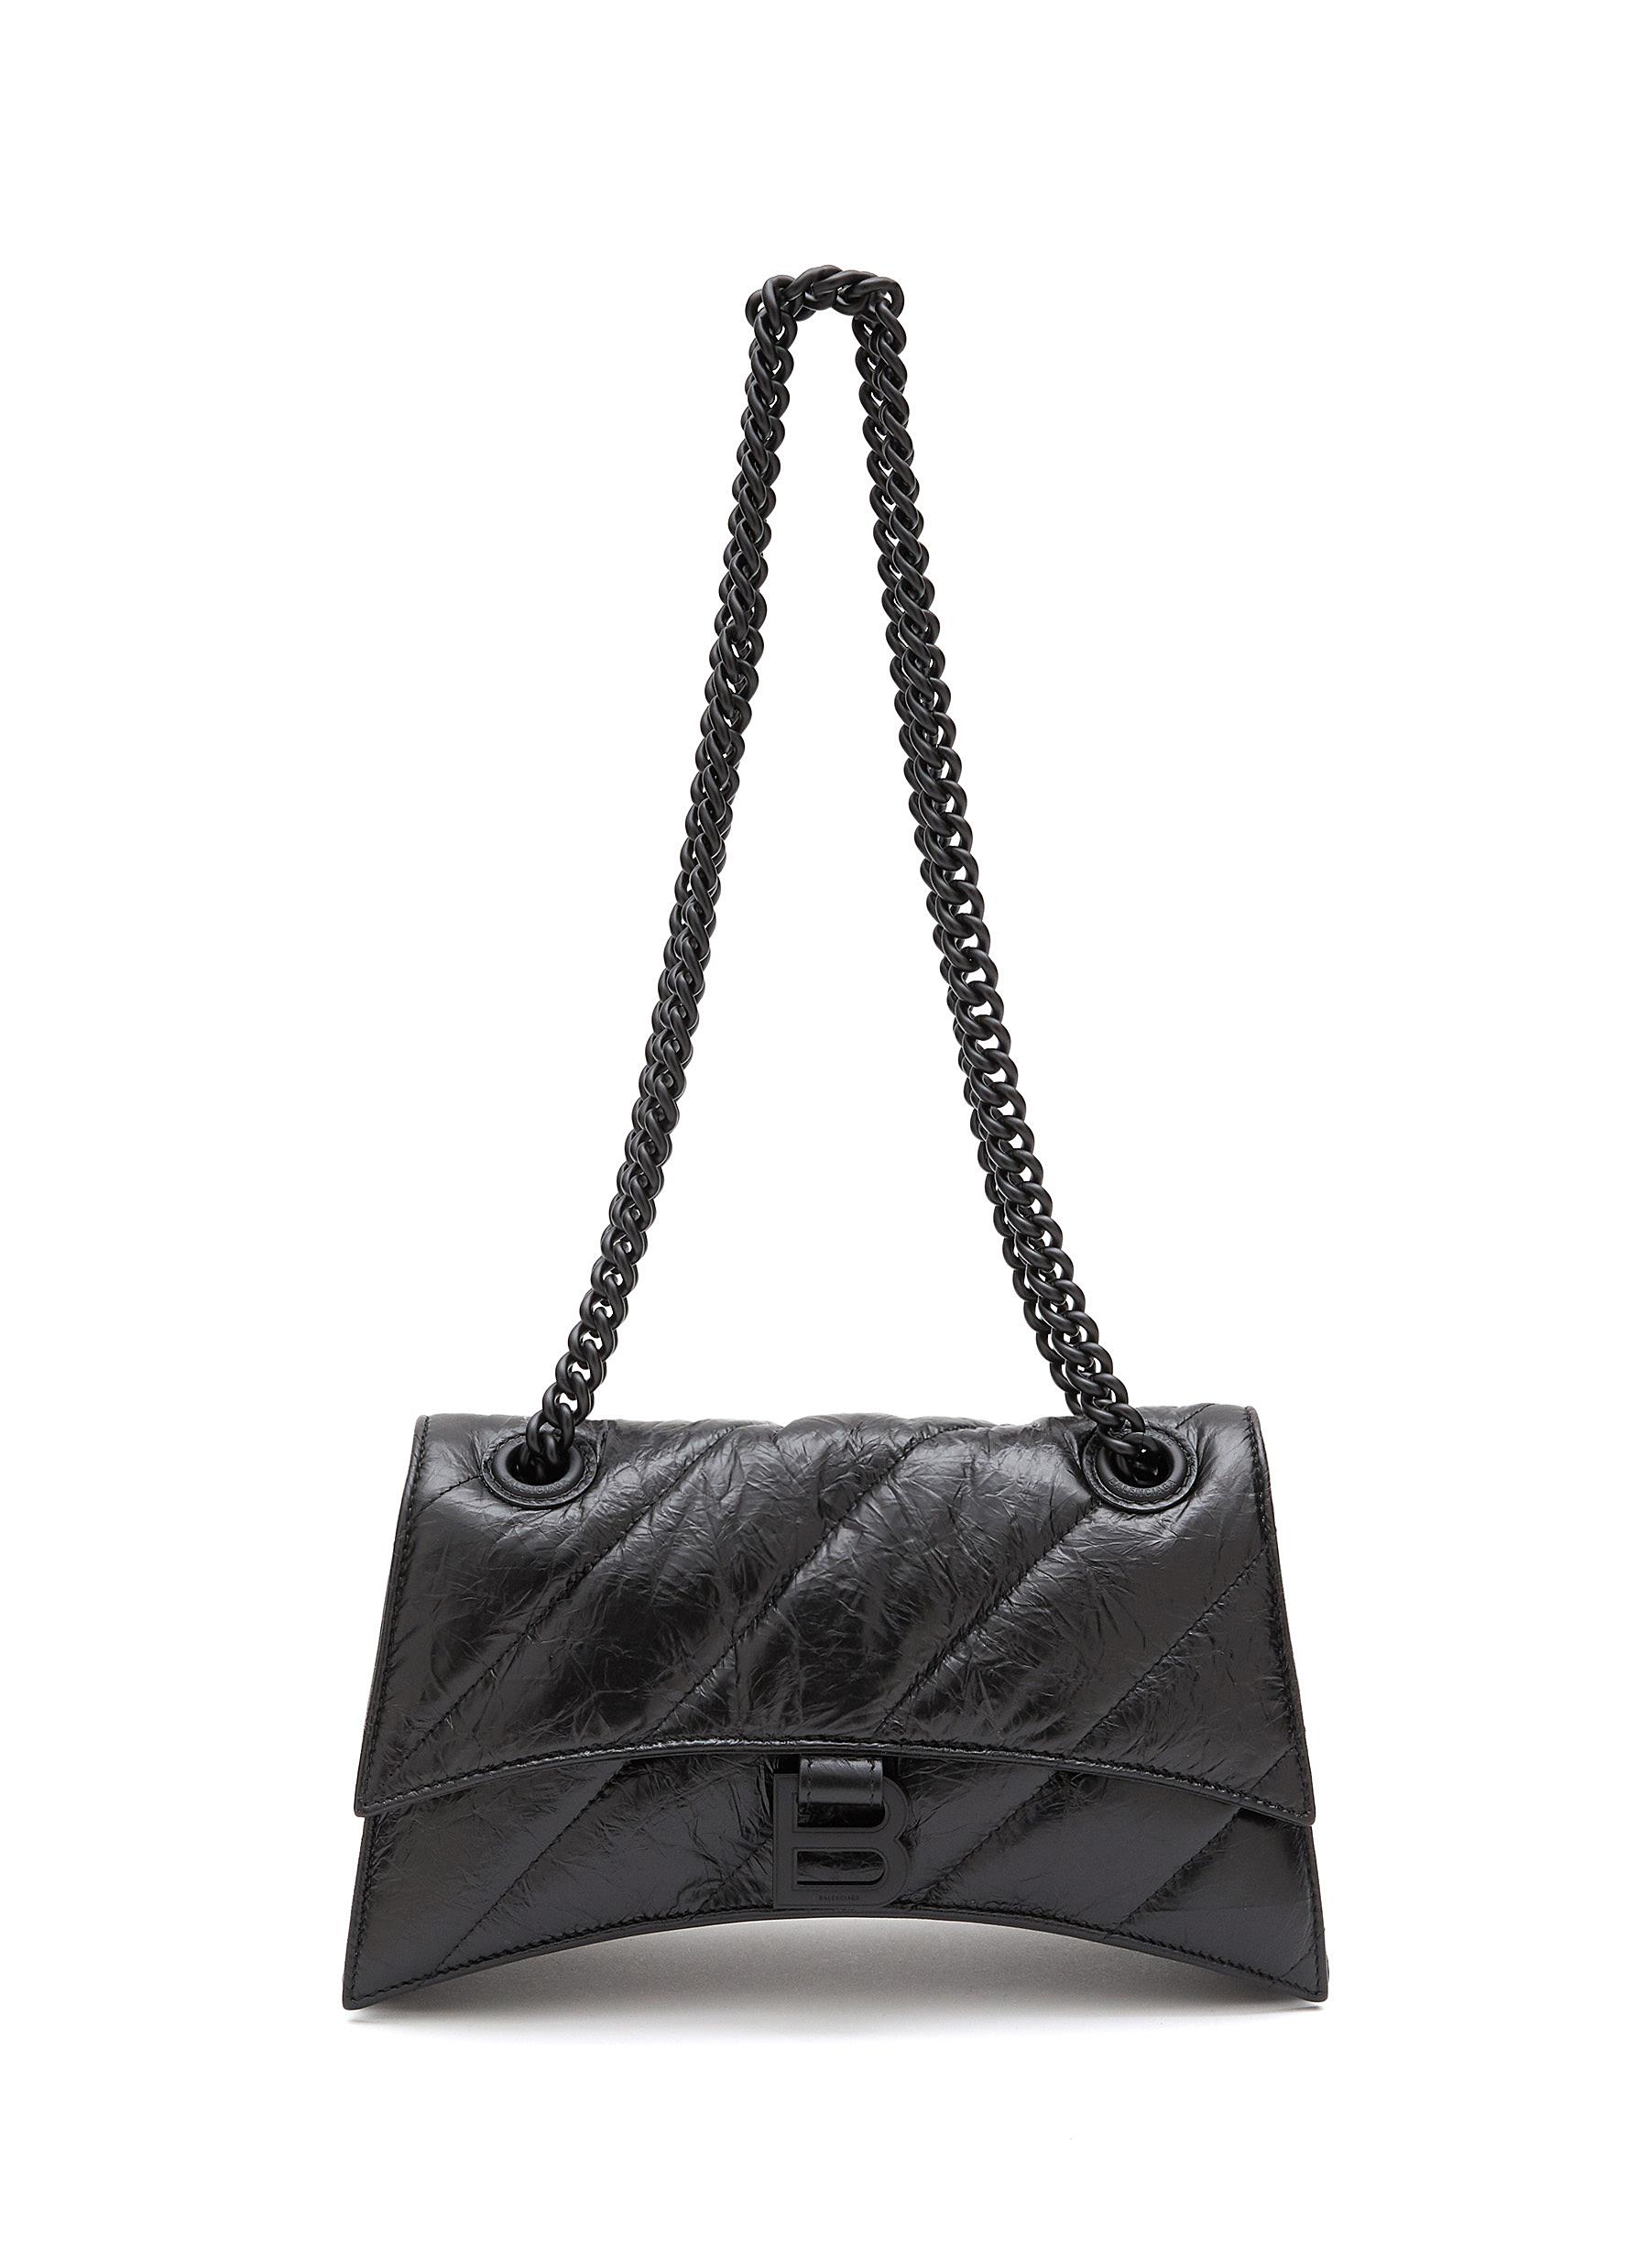 BALENCIAGA 'Crush' Small Chain Strap Quilted Leather Bag